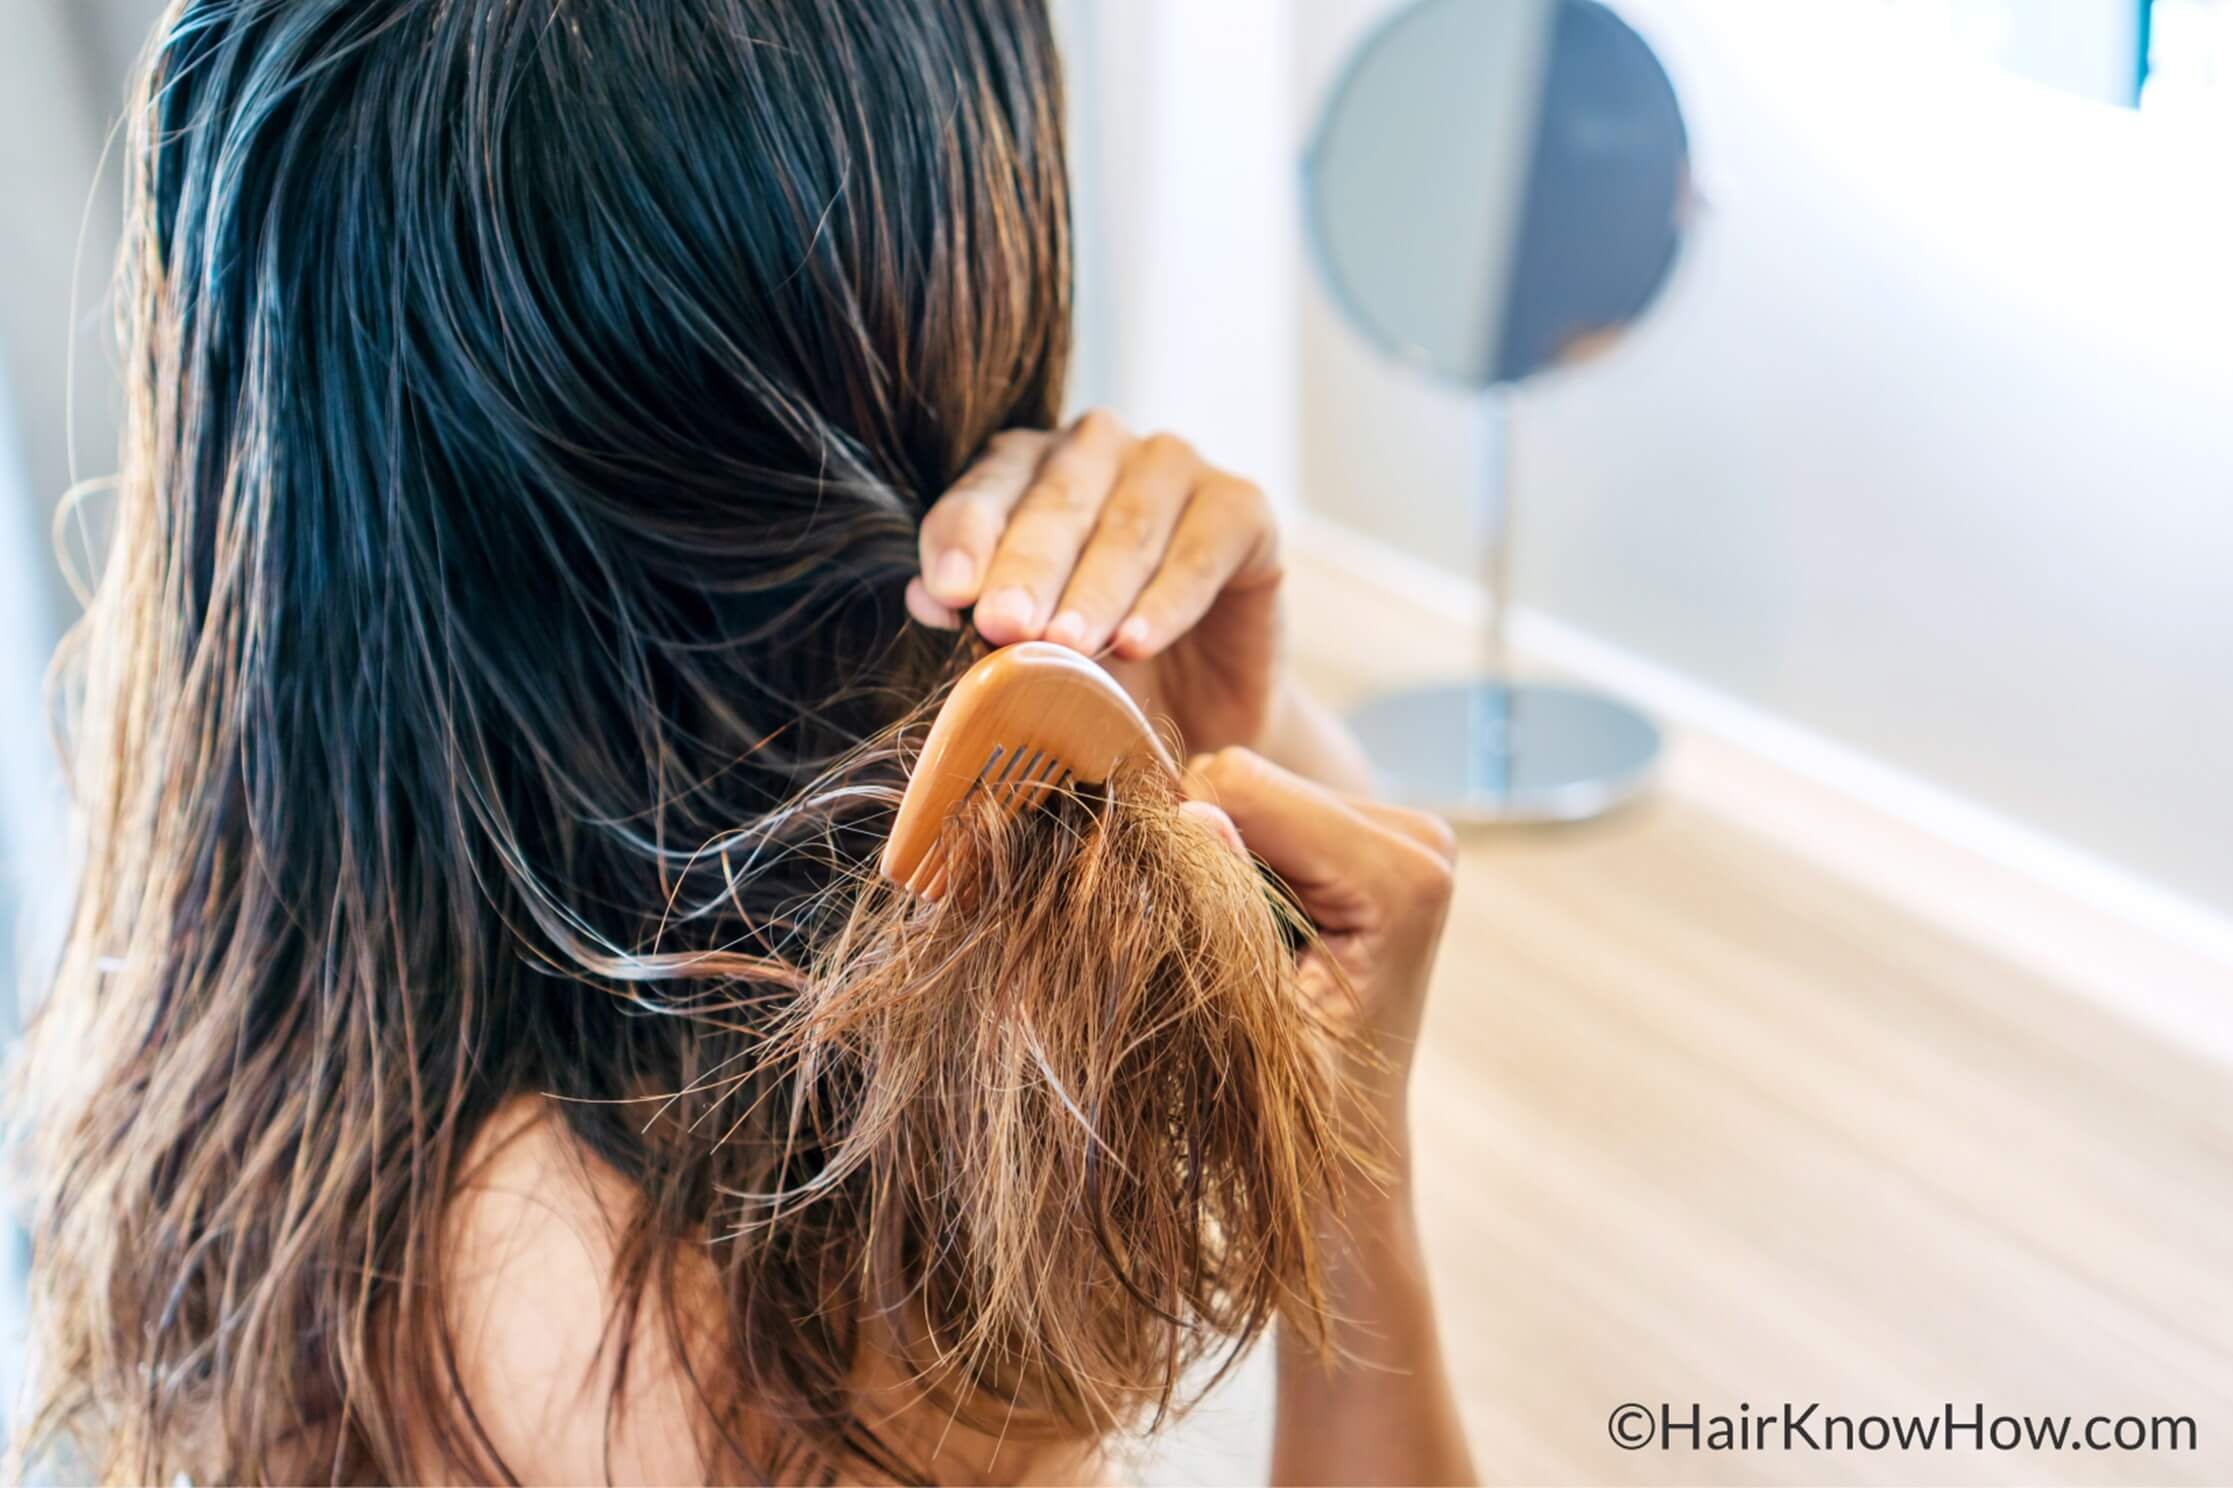 How Damaged Is My Hair - Start Making Informed Positive Changes To Your Hair  Routine —  Get Accurate Results with Our Professional Hair  Test & Analysis Services - Unlock Your Hair's